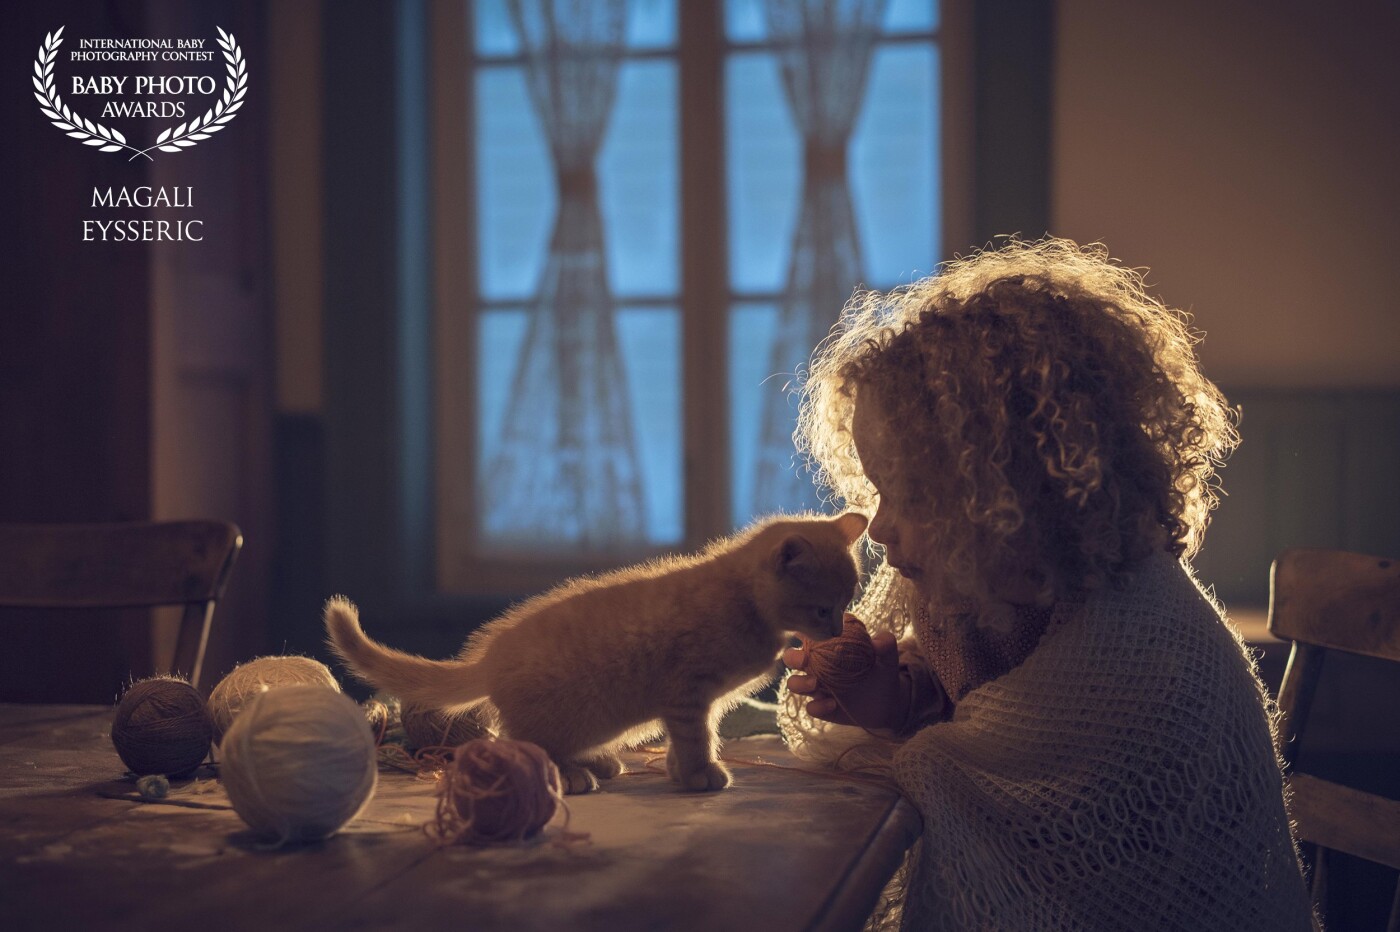 At the blue hours, she's playing with her cat <br />
This little girl was so pretty with her blond curly hair<br />
She was playing for the camera.<br />
